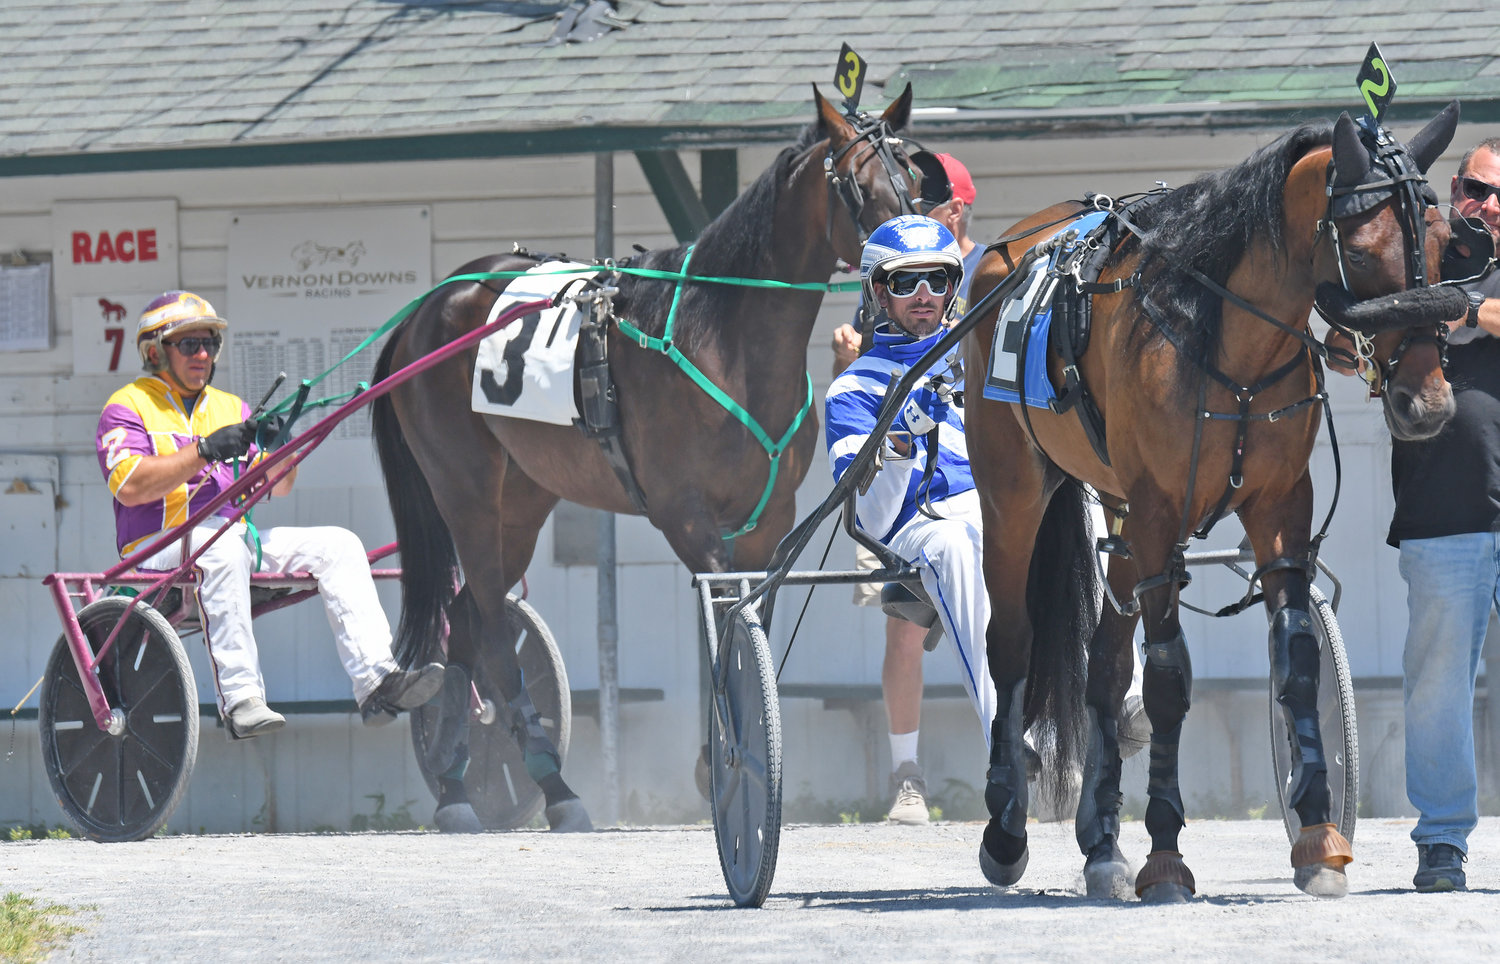 Horses in the first race at Vernon Downs walk out to the track on Monday afternoon. They are Stanley Zombick Jr. with No. 3 What A Fit and Steeven Genois No. 2 La Surprenante.